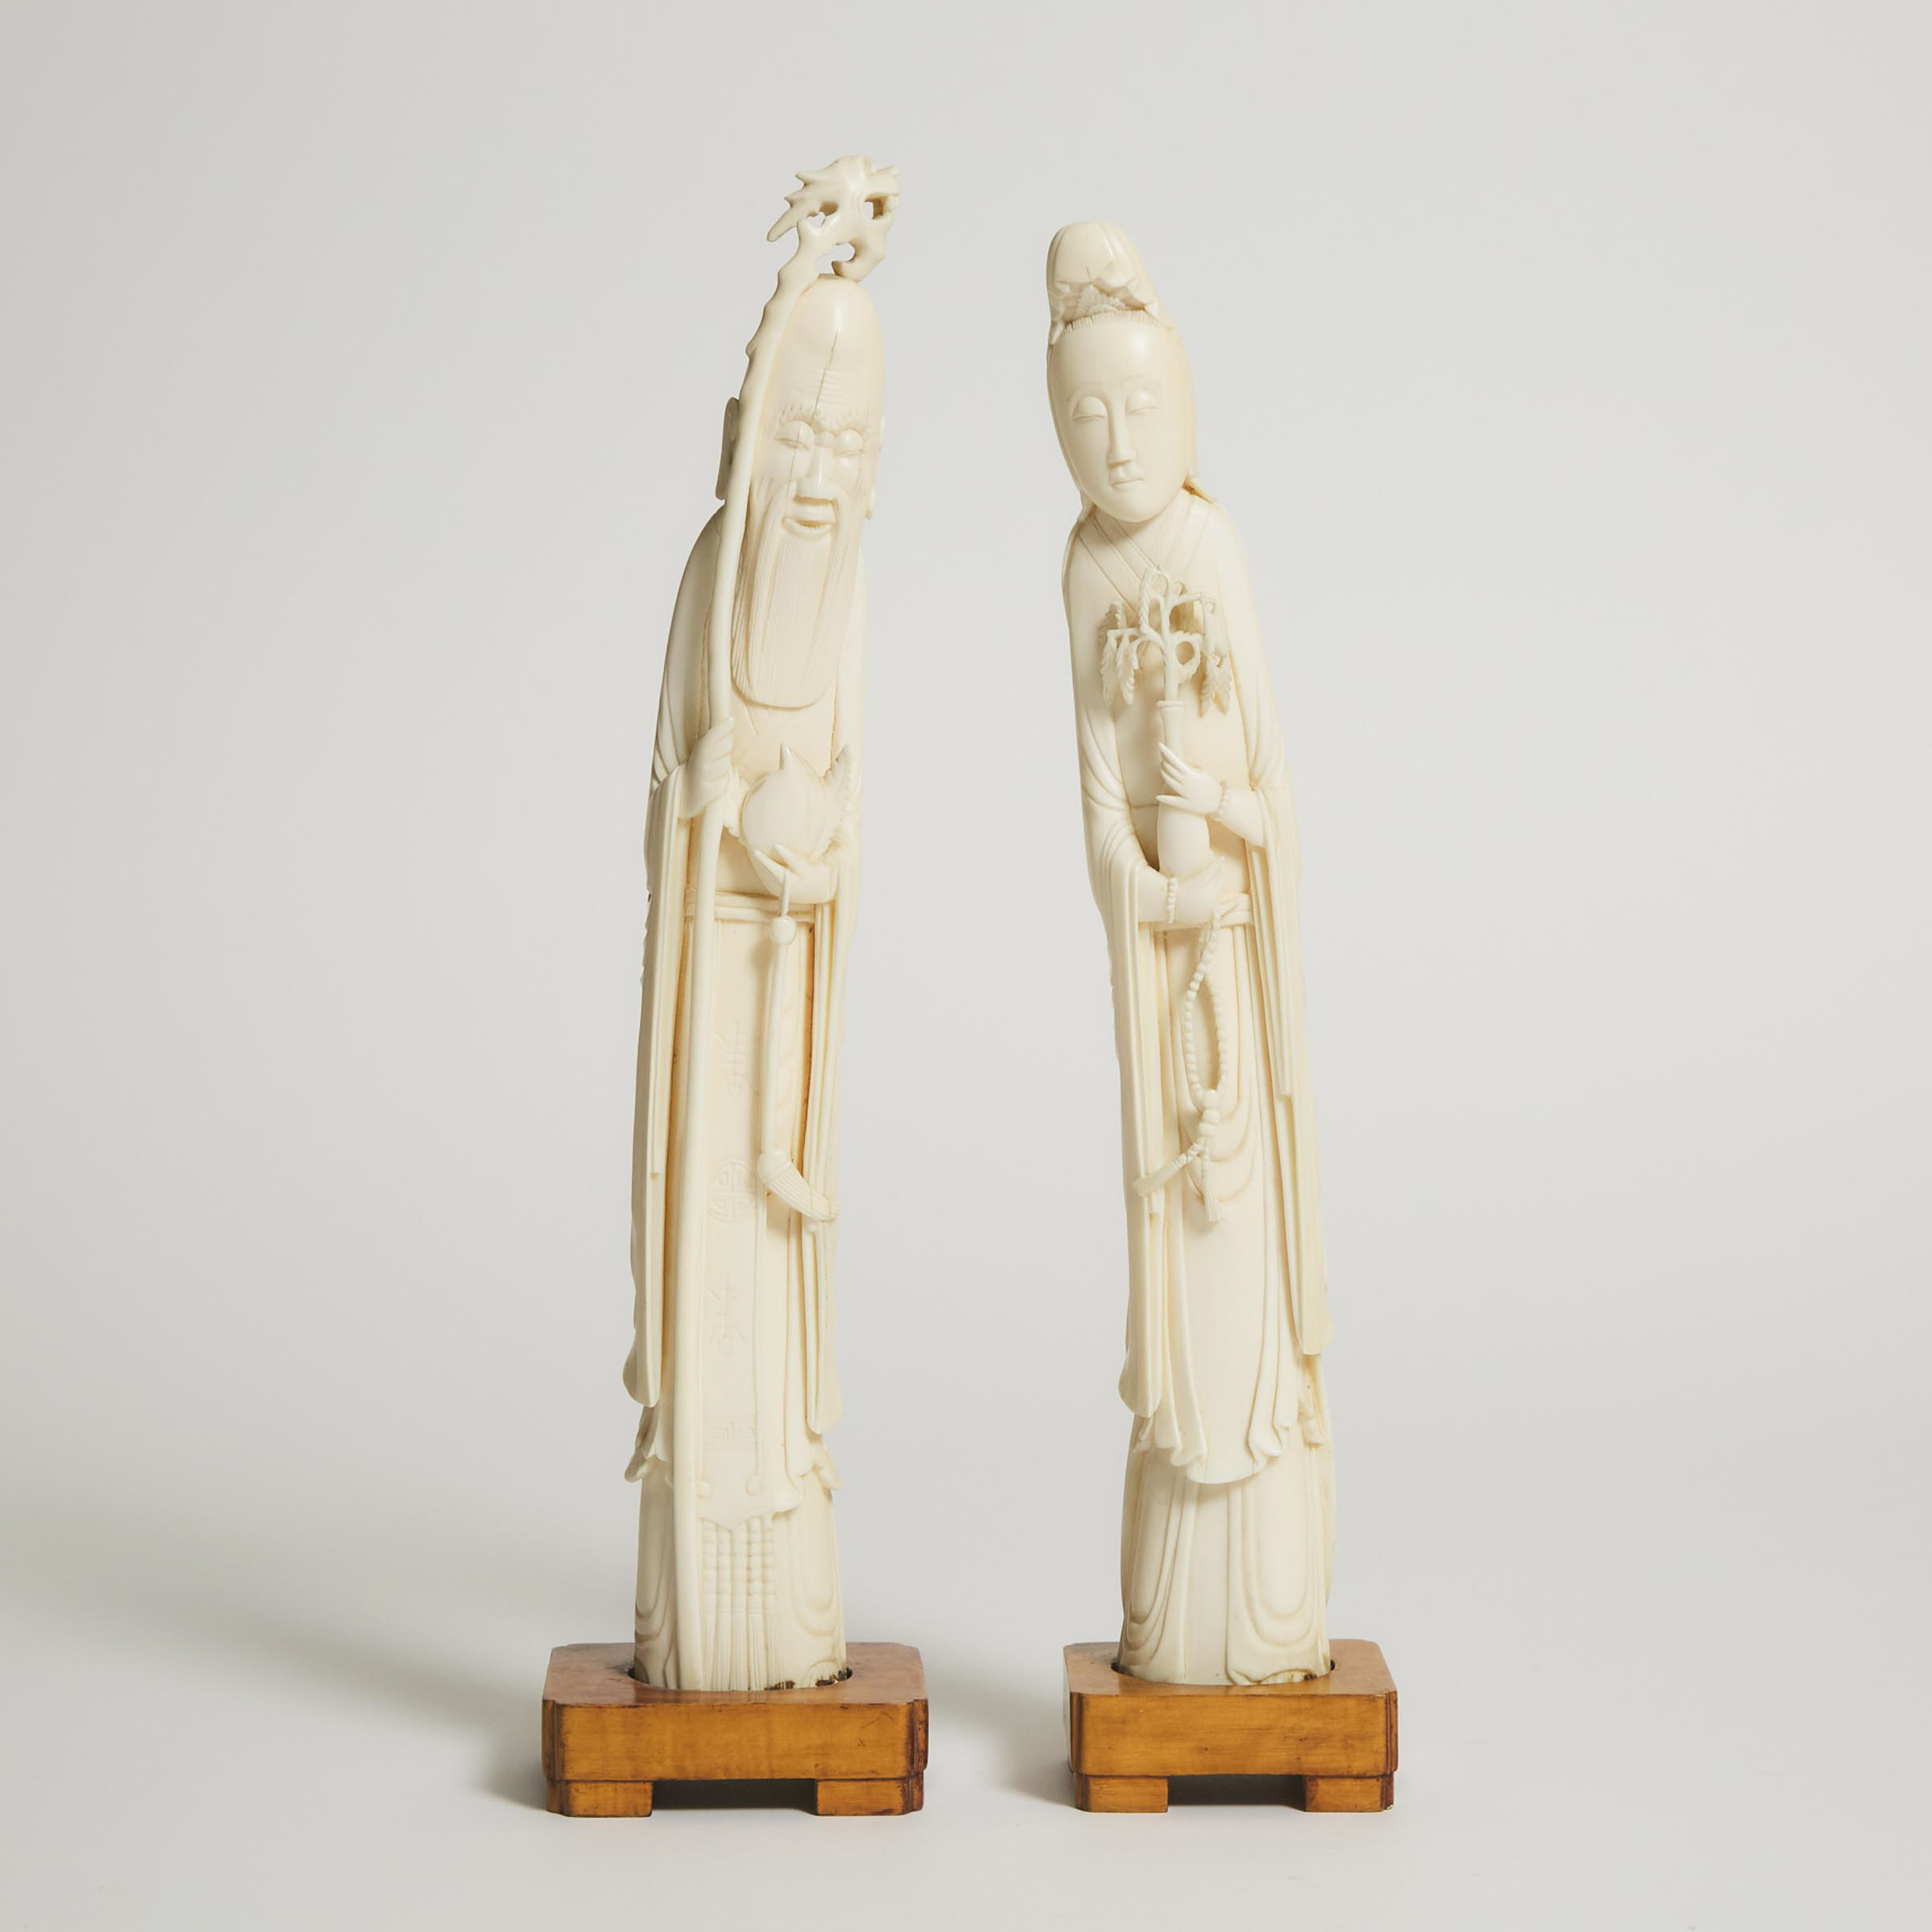 A Pair of Ivory Figures of Shoulao